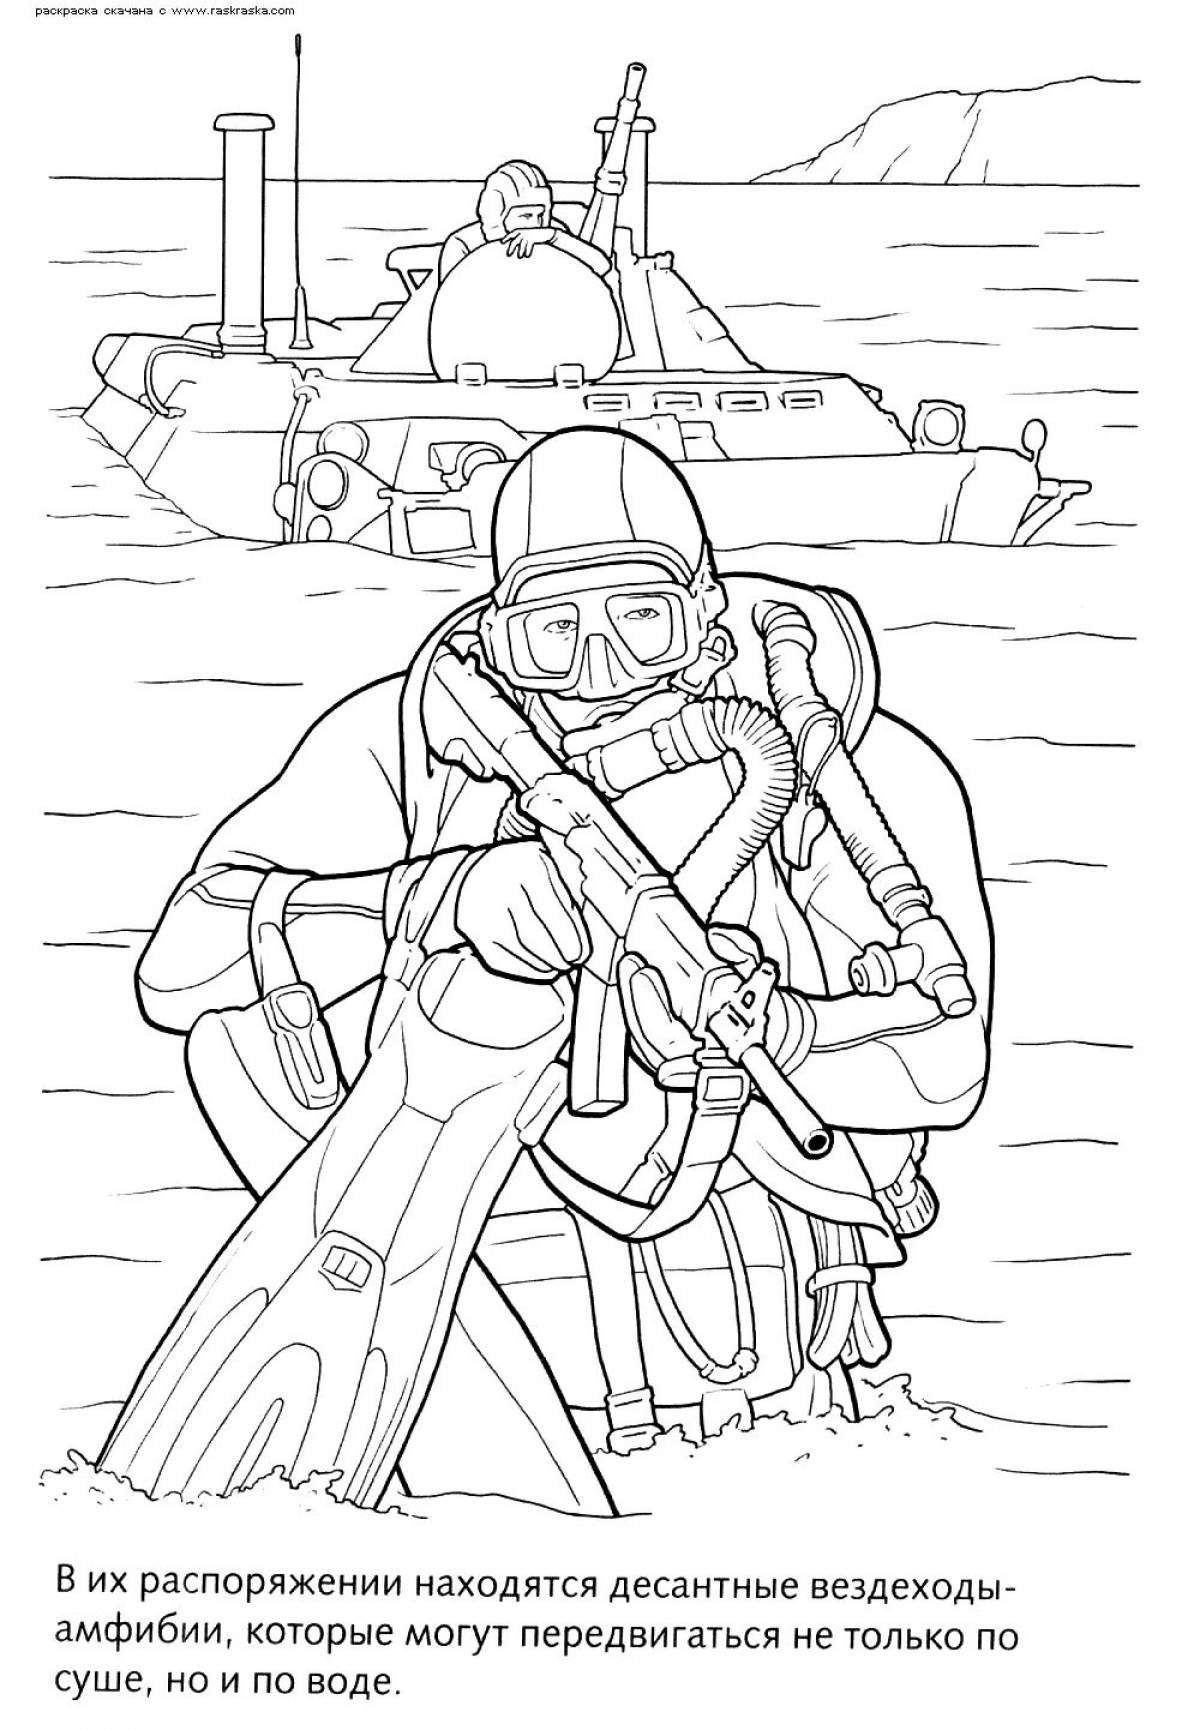 Fancy marines coloring page